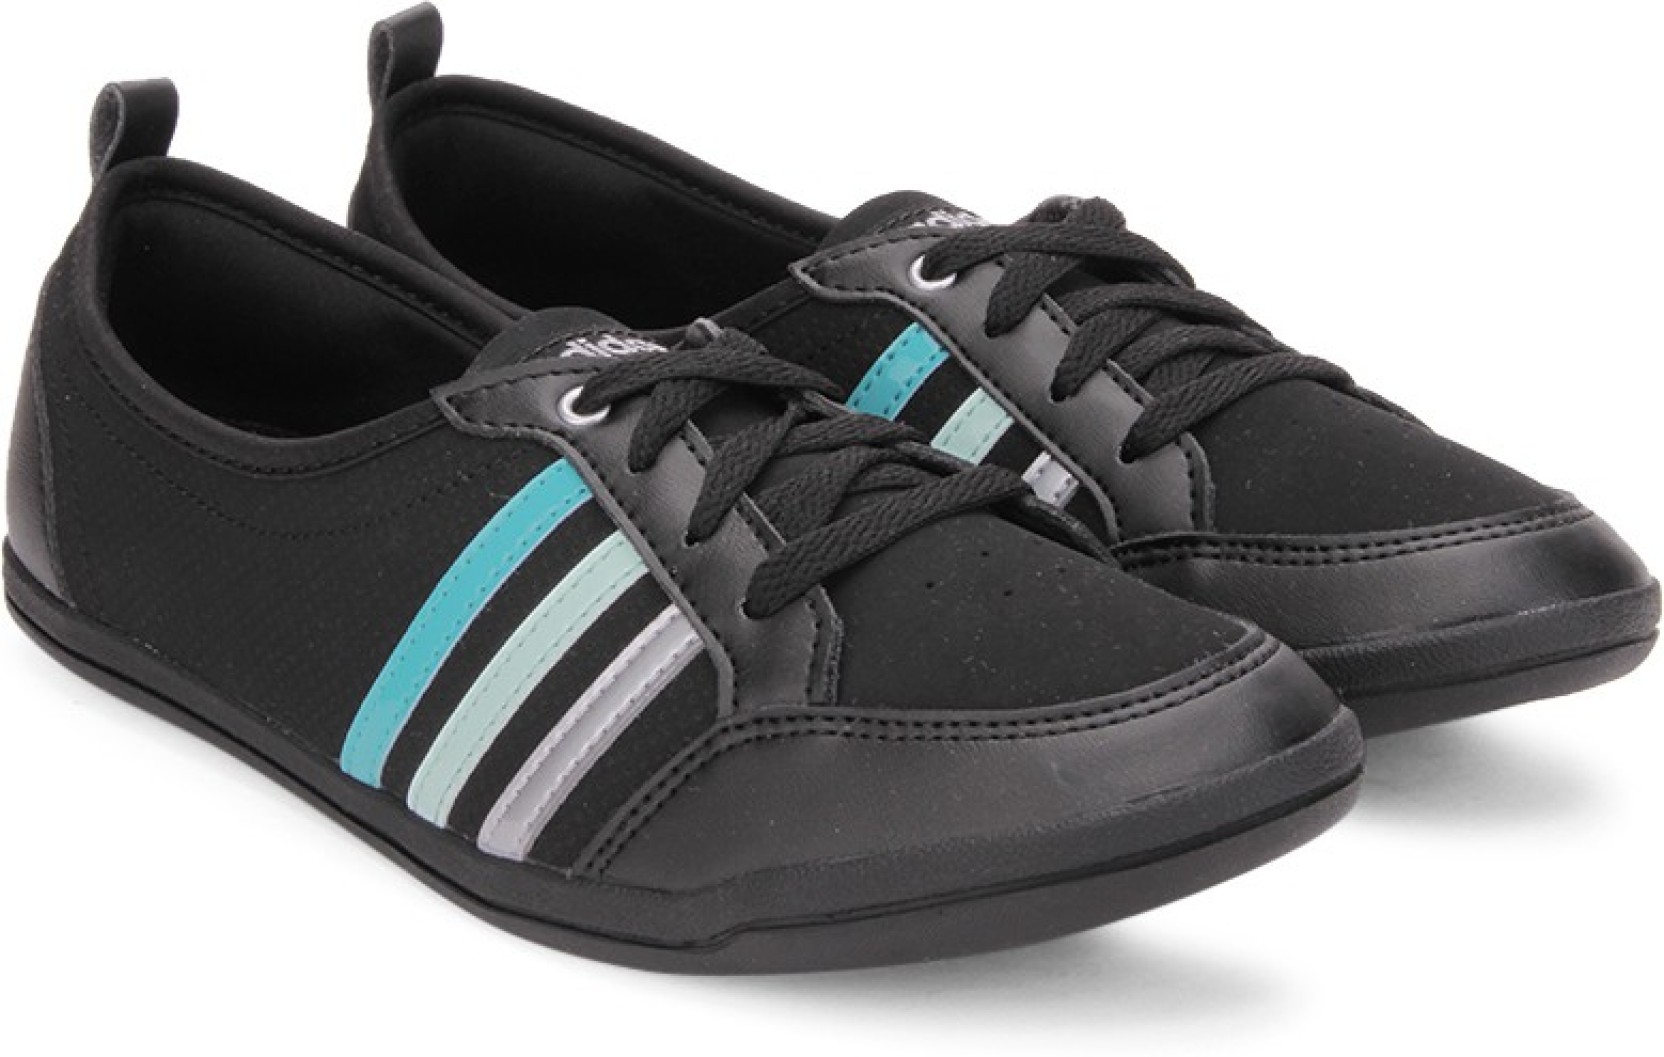 ADIDAS NEO PIONA W Sneakers For Women 